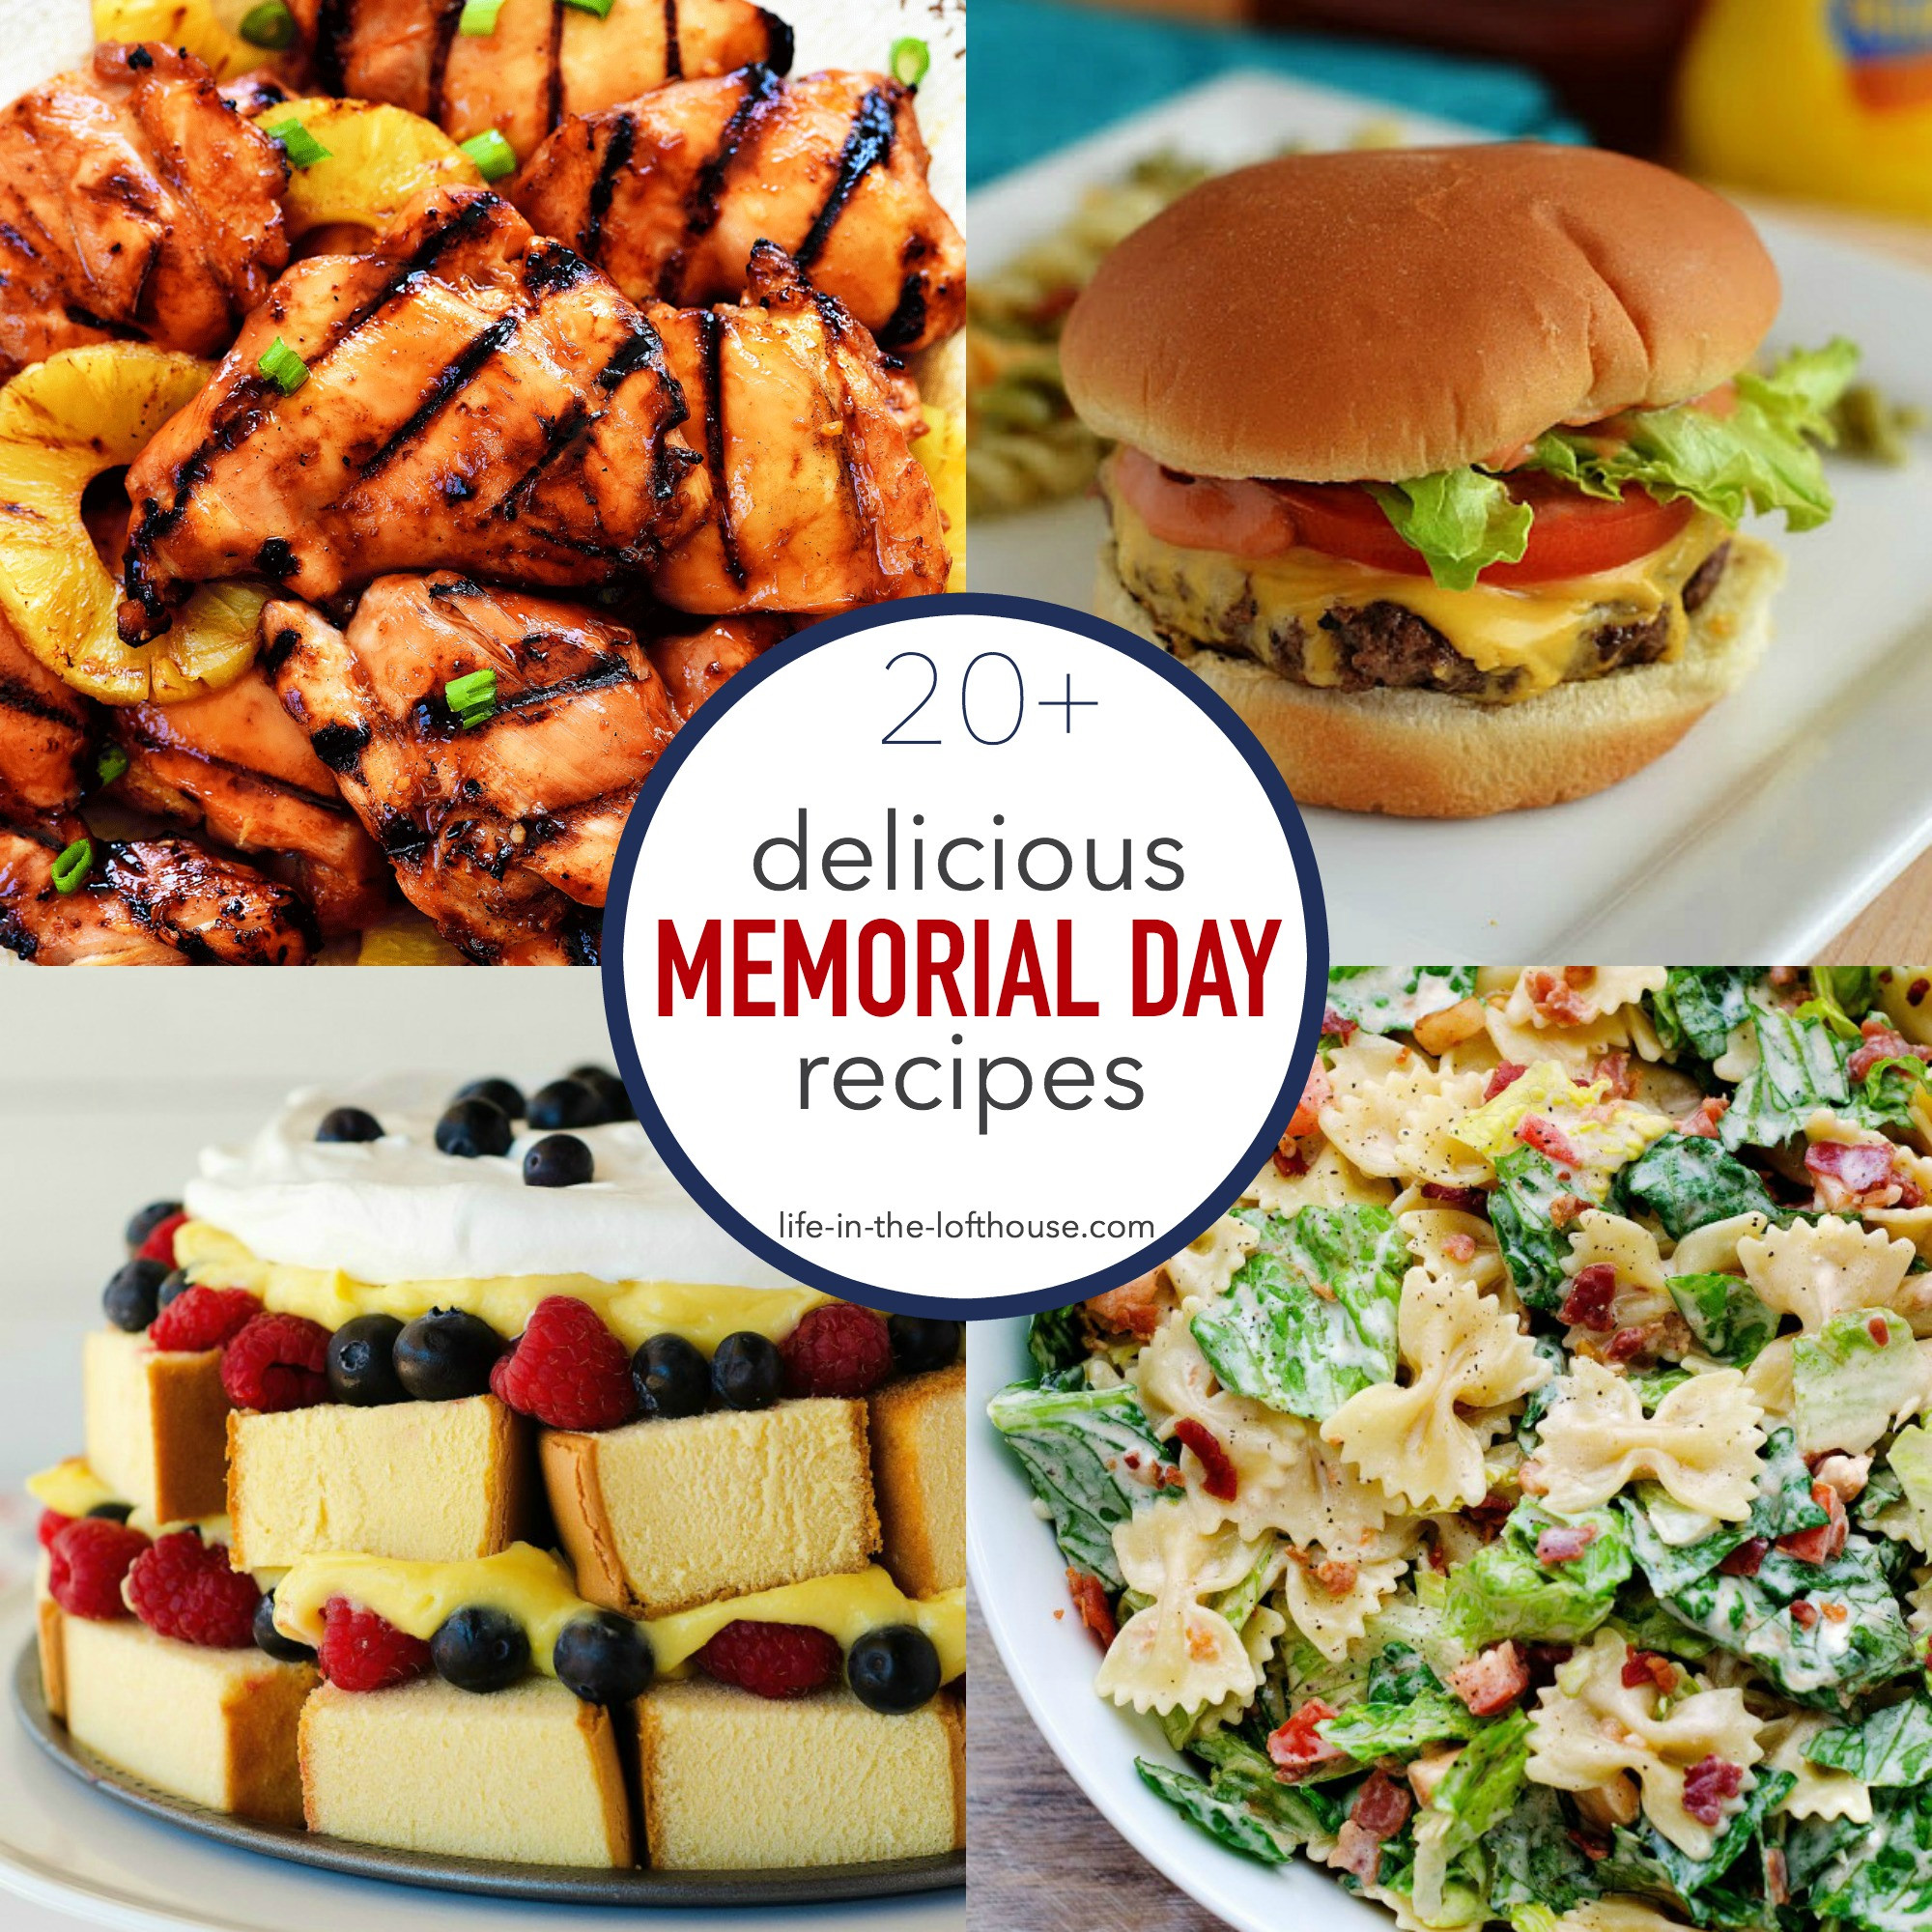 Memorial Day Food Recipes
 20 Delicious Memorial Day Recipes Life In The Lofthouse